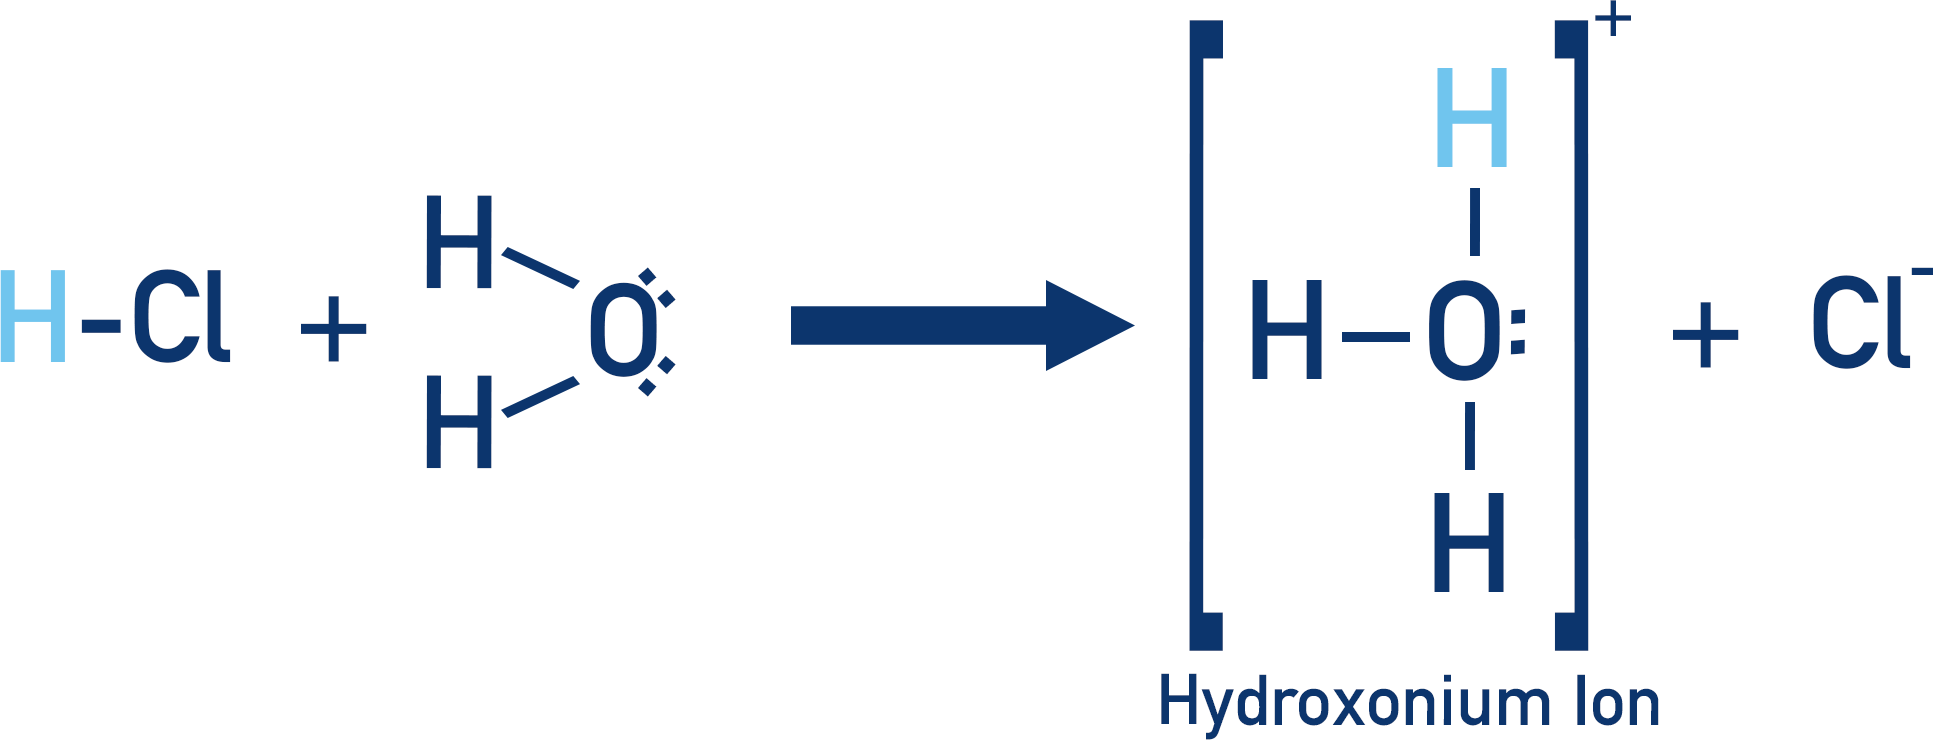 hydroxonium ion from HCl and H2O